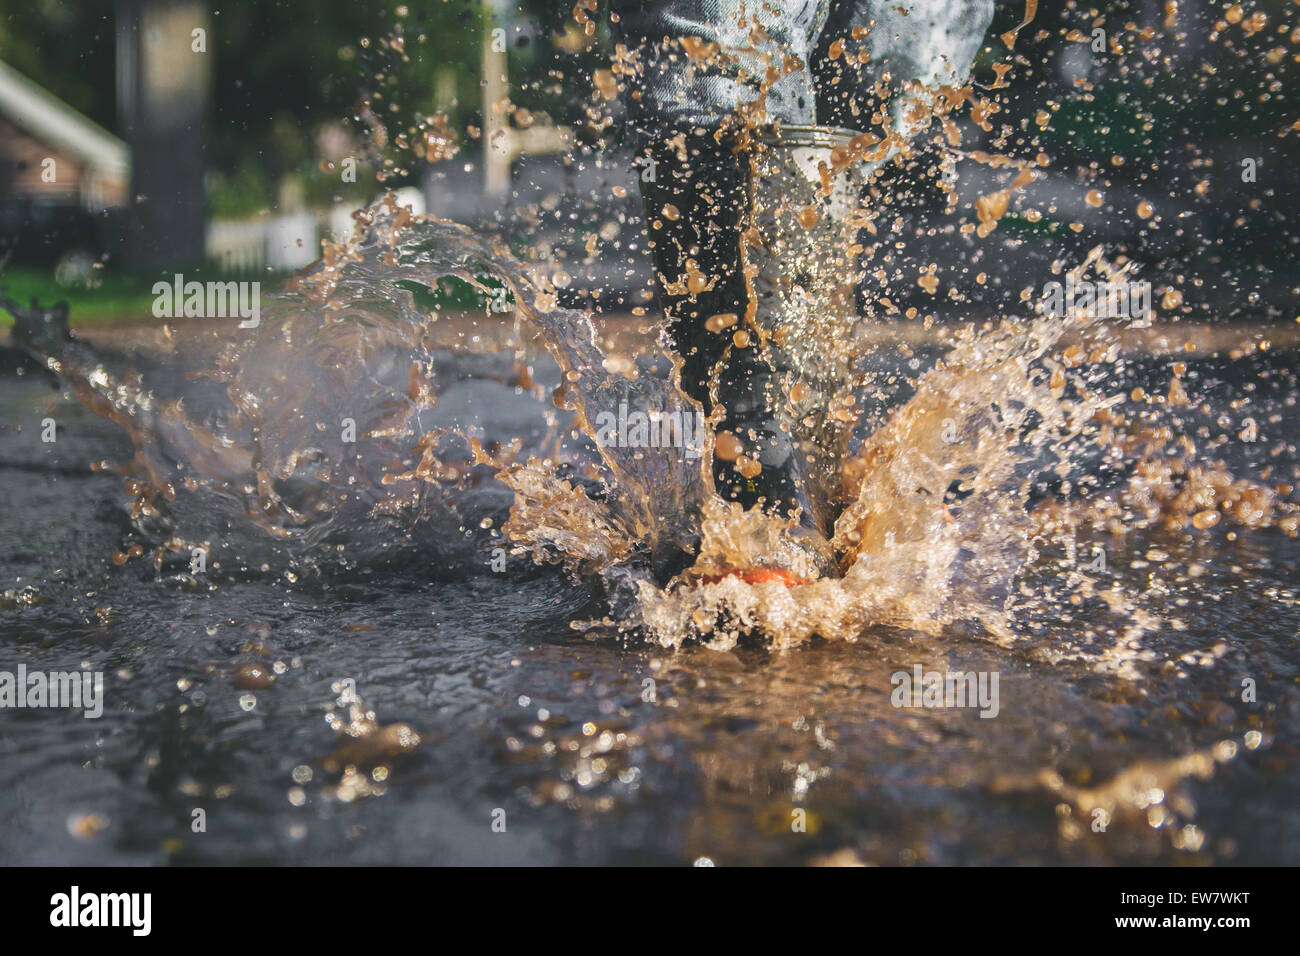 Close-up of child's legs splashing in a puddle of water Stock Photo